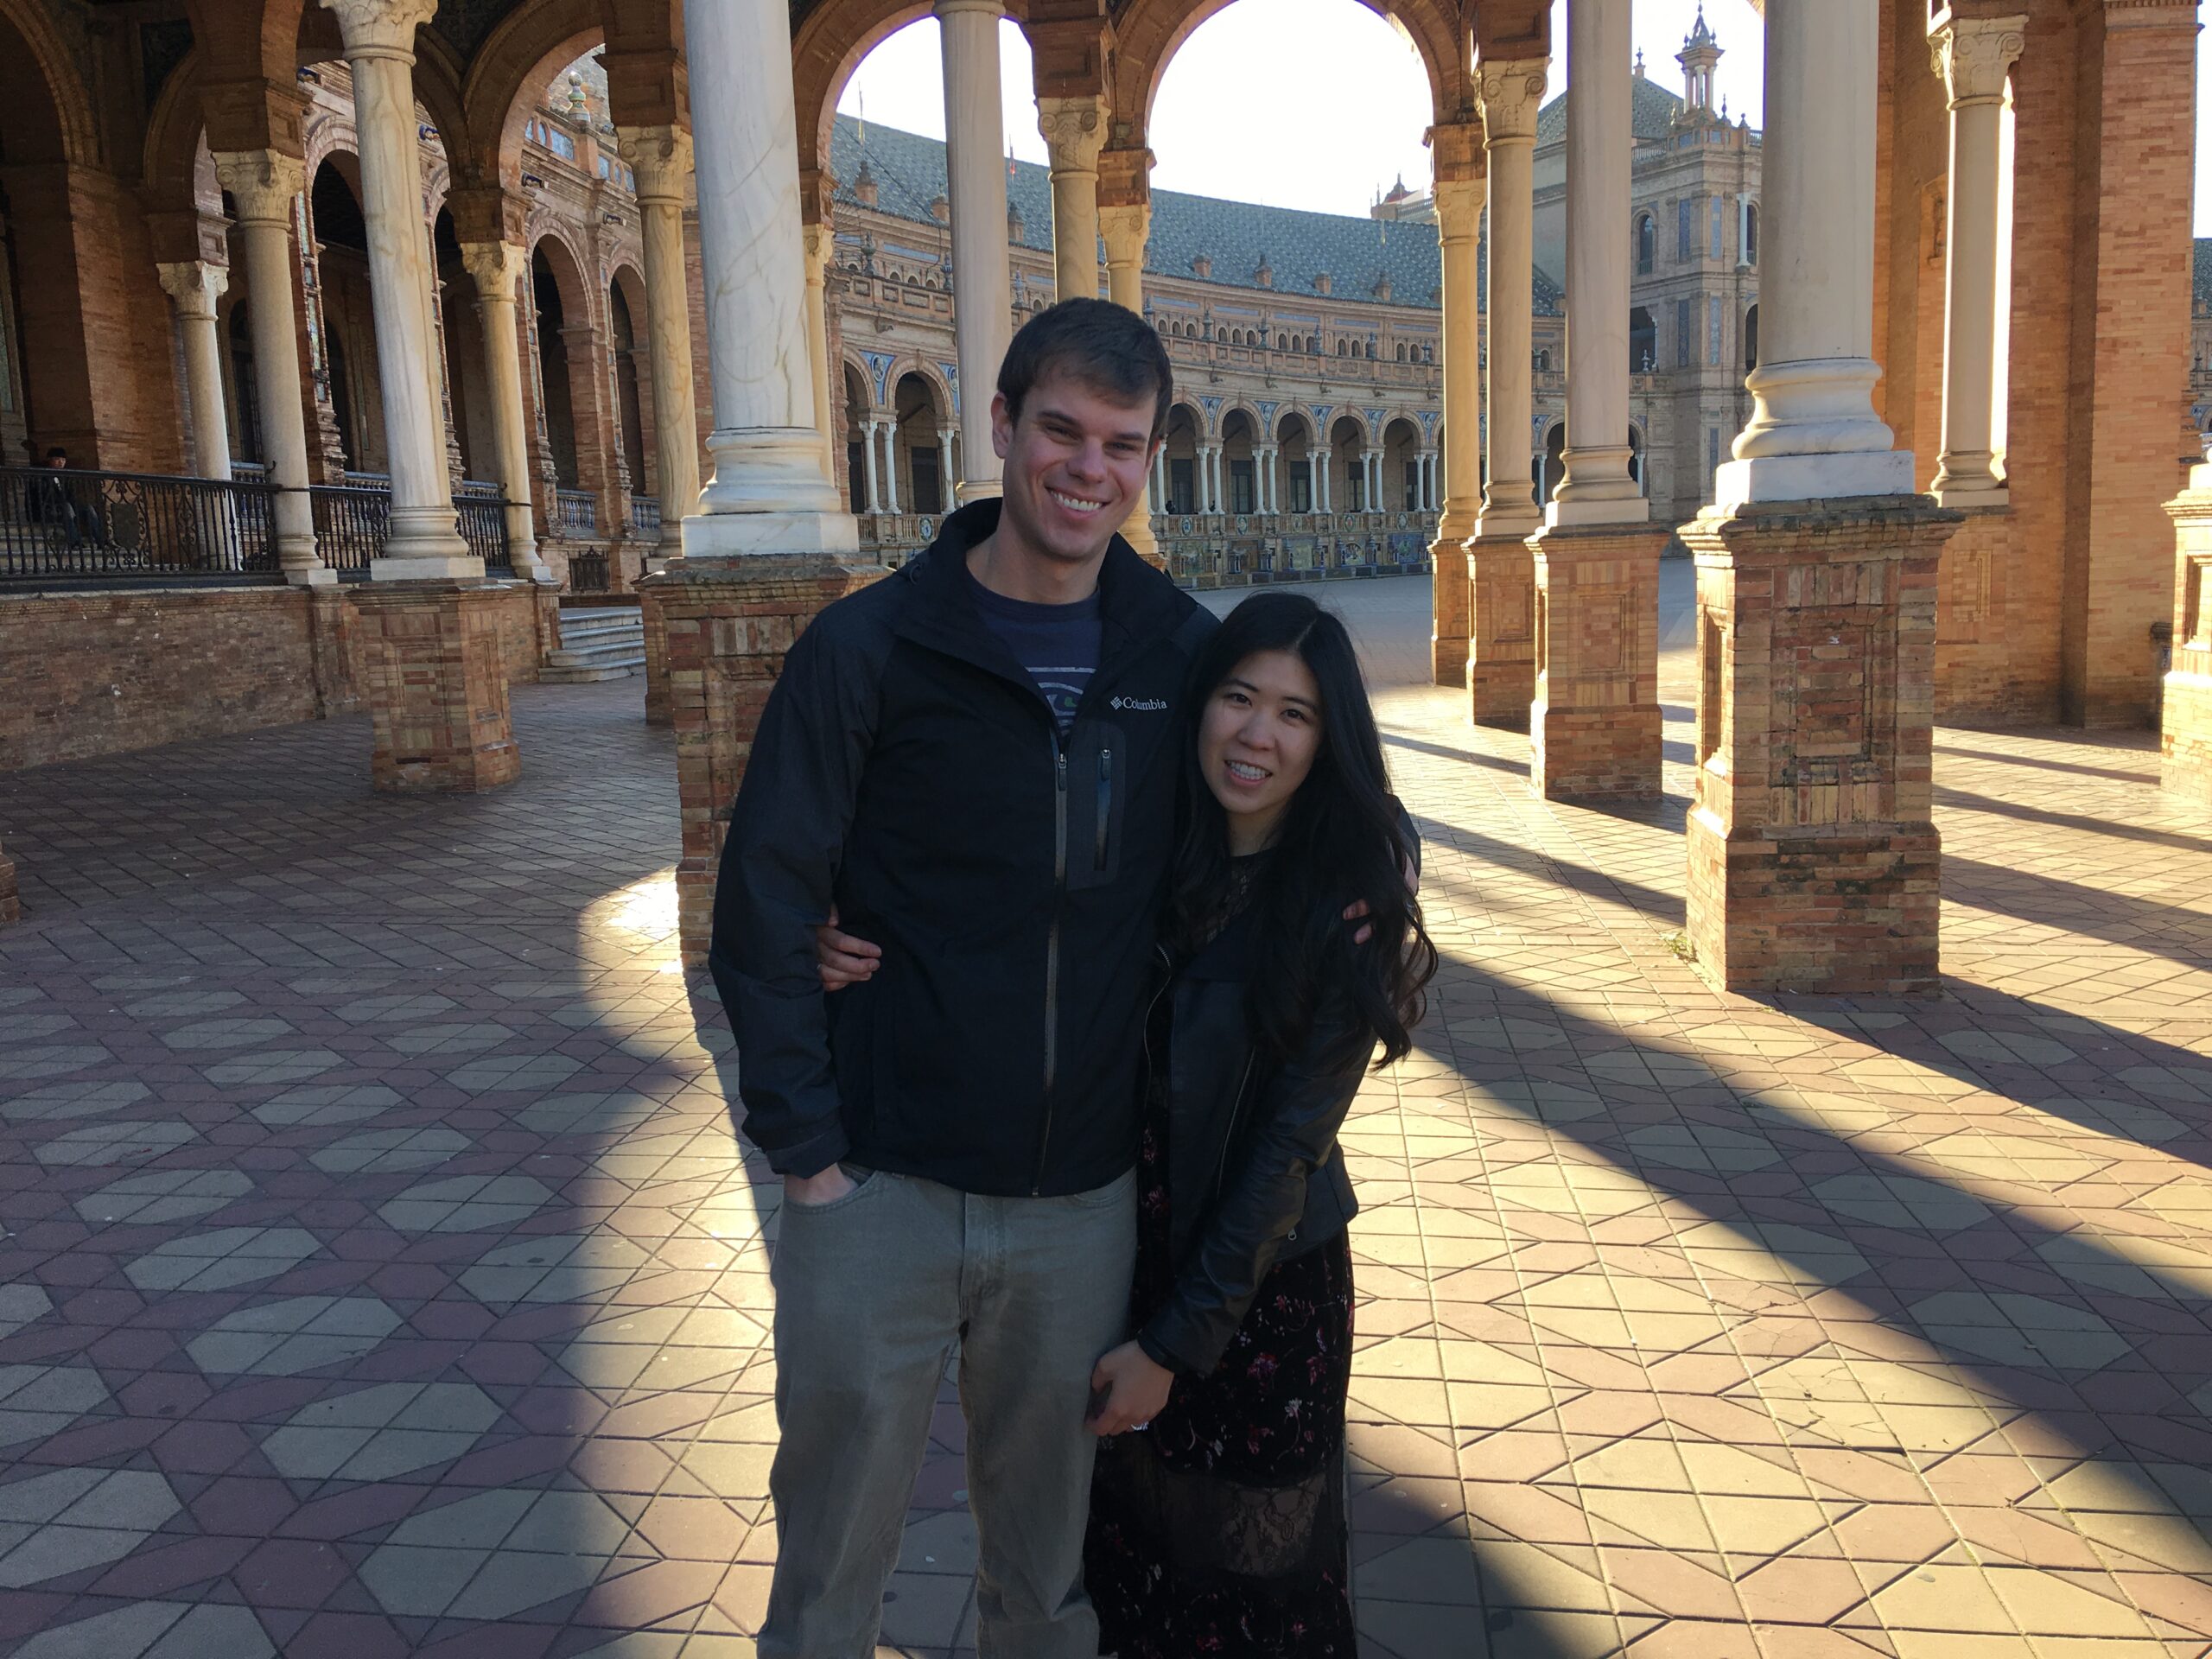 Hanging out at the Plaza de Espana